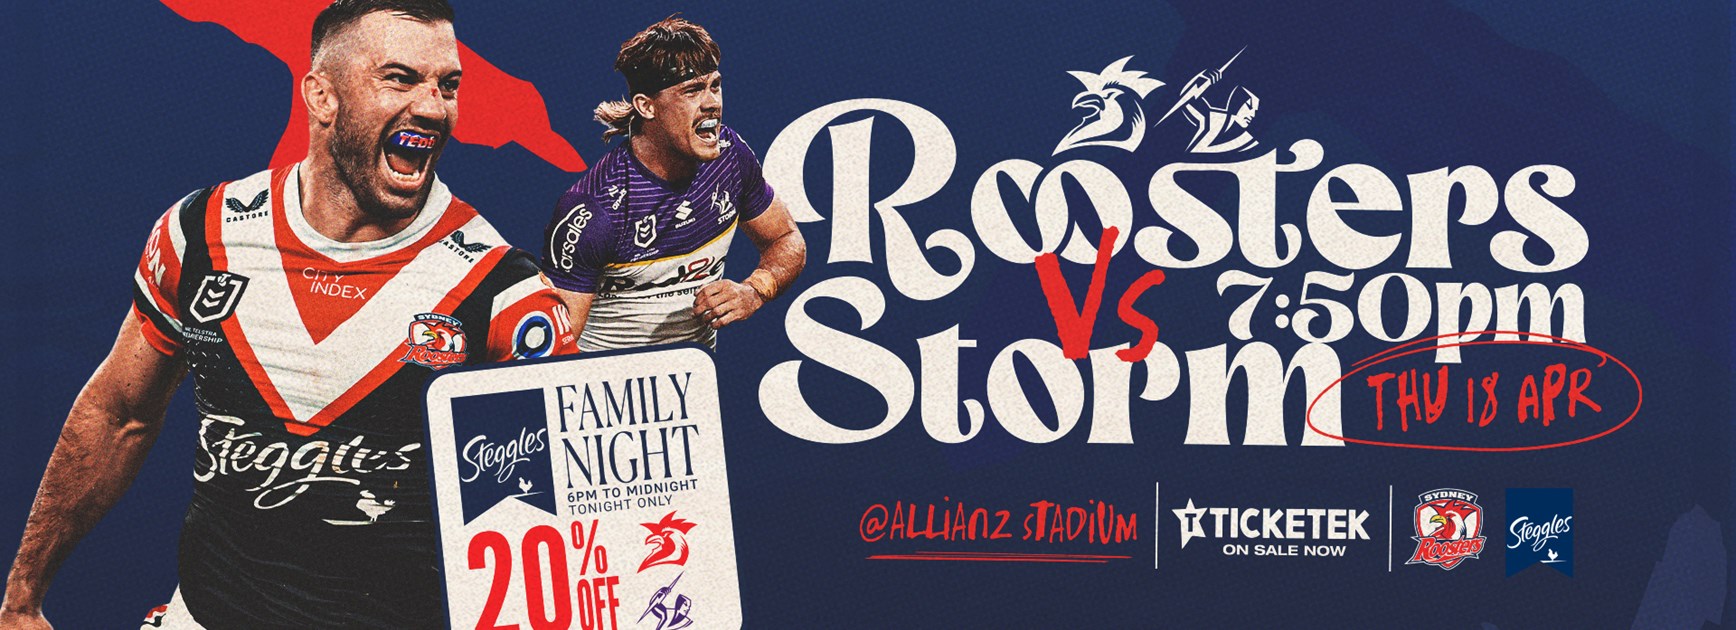 Get 20% Off All Round 7 Family Passes with Steggles Family Night!